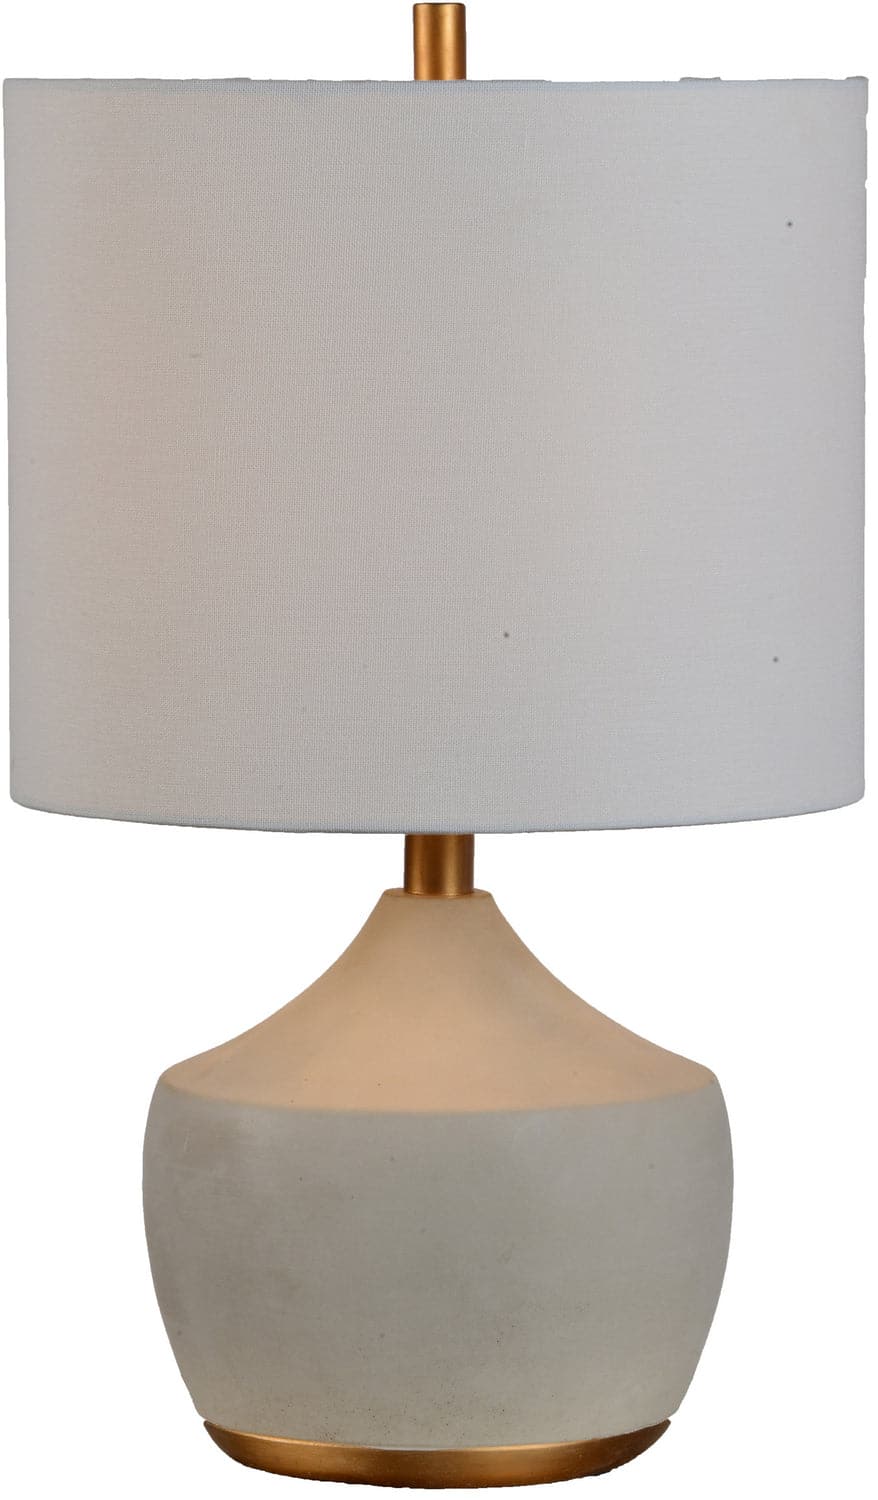 Renwil - LPT958 - One Light Table Lamp - Horme - Gray, Gold